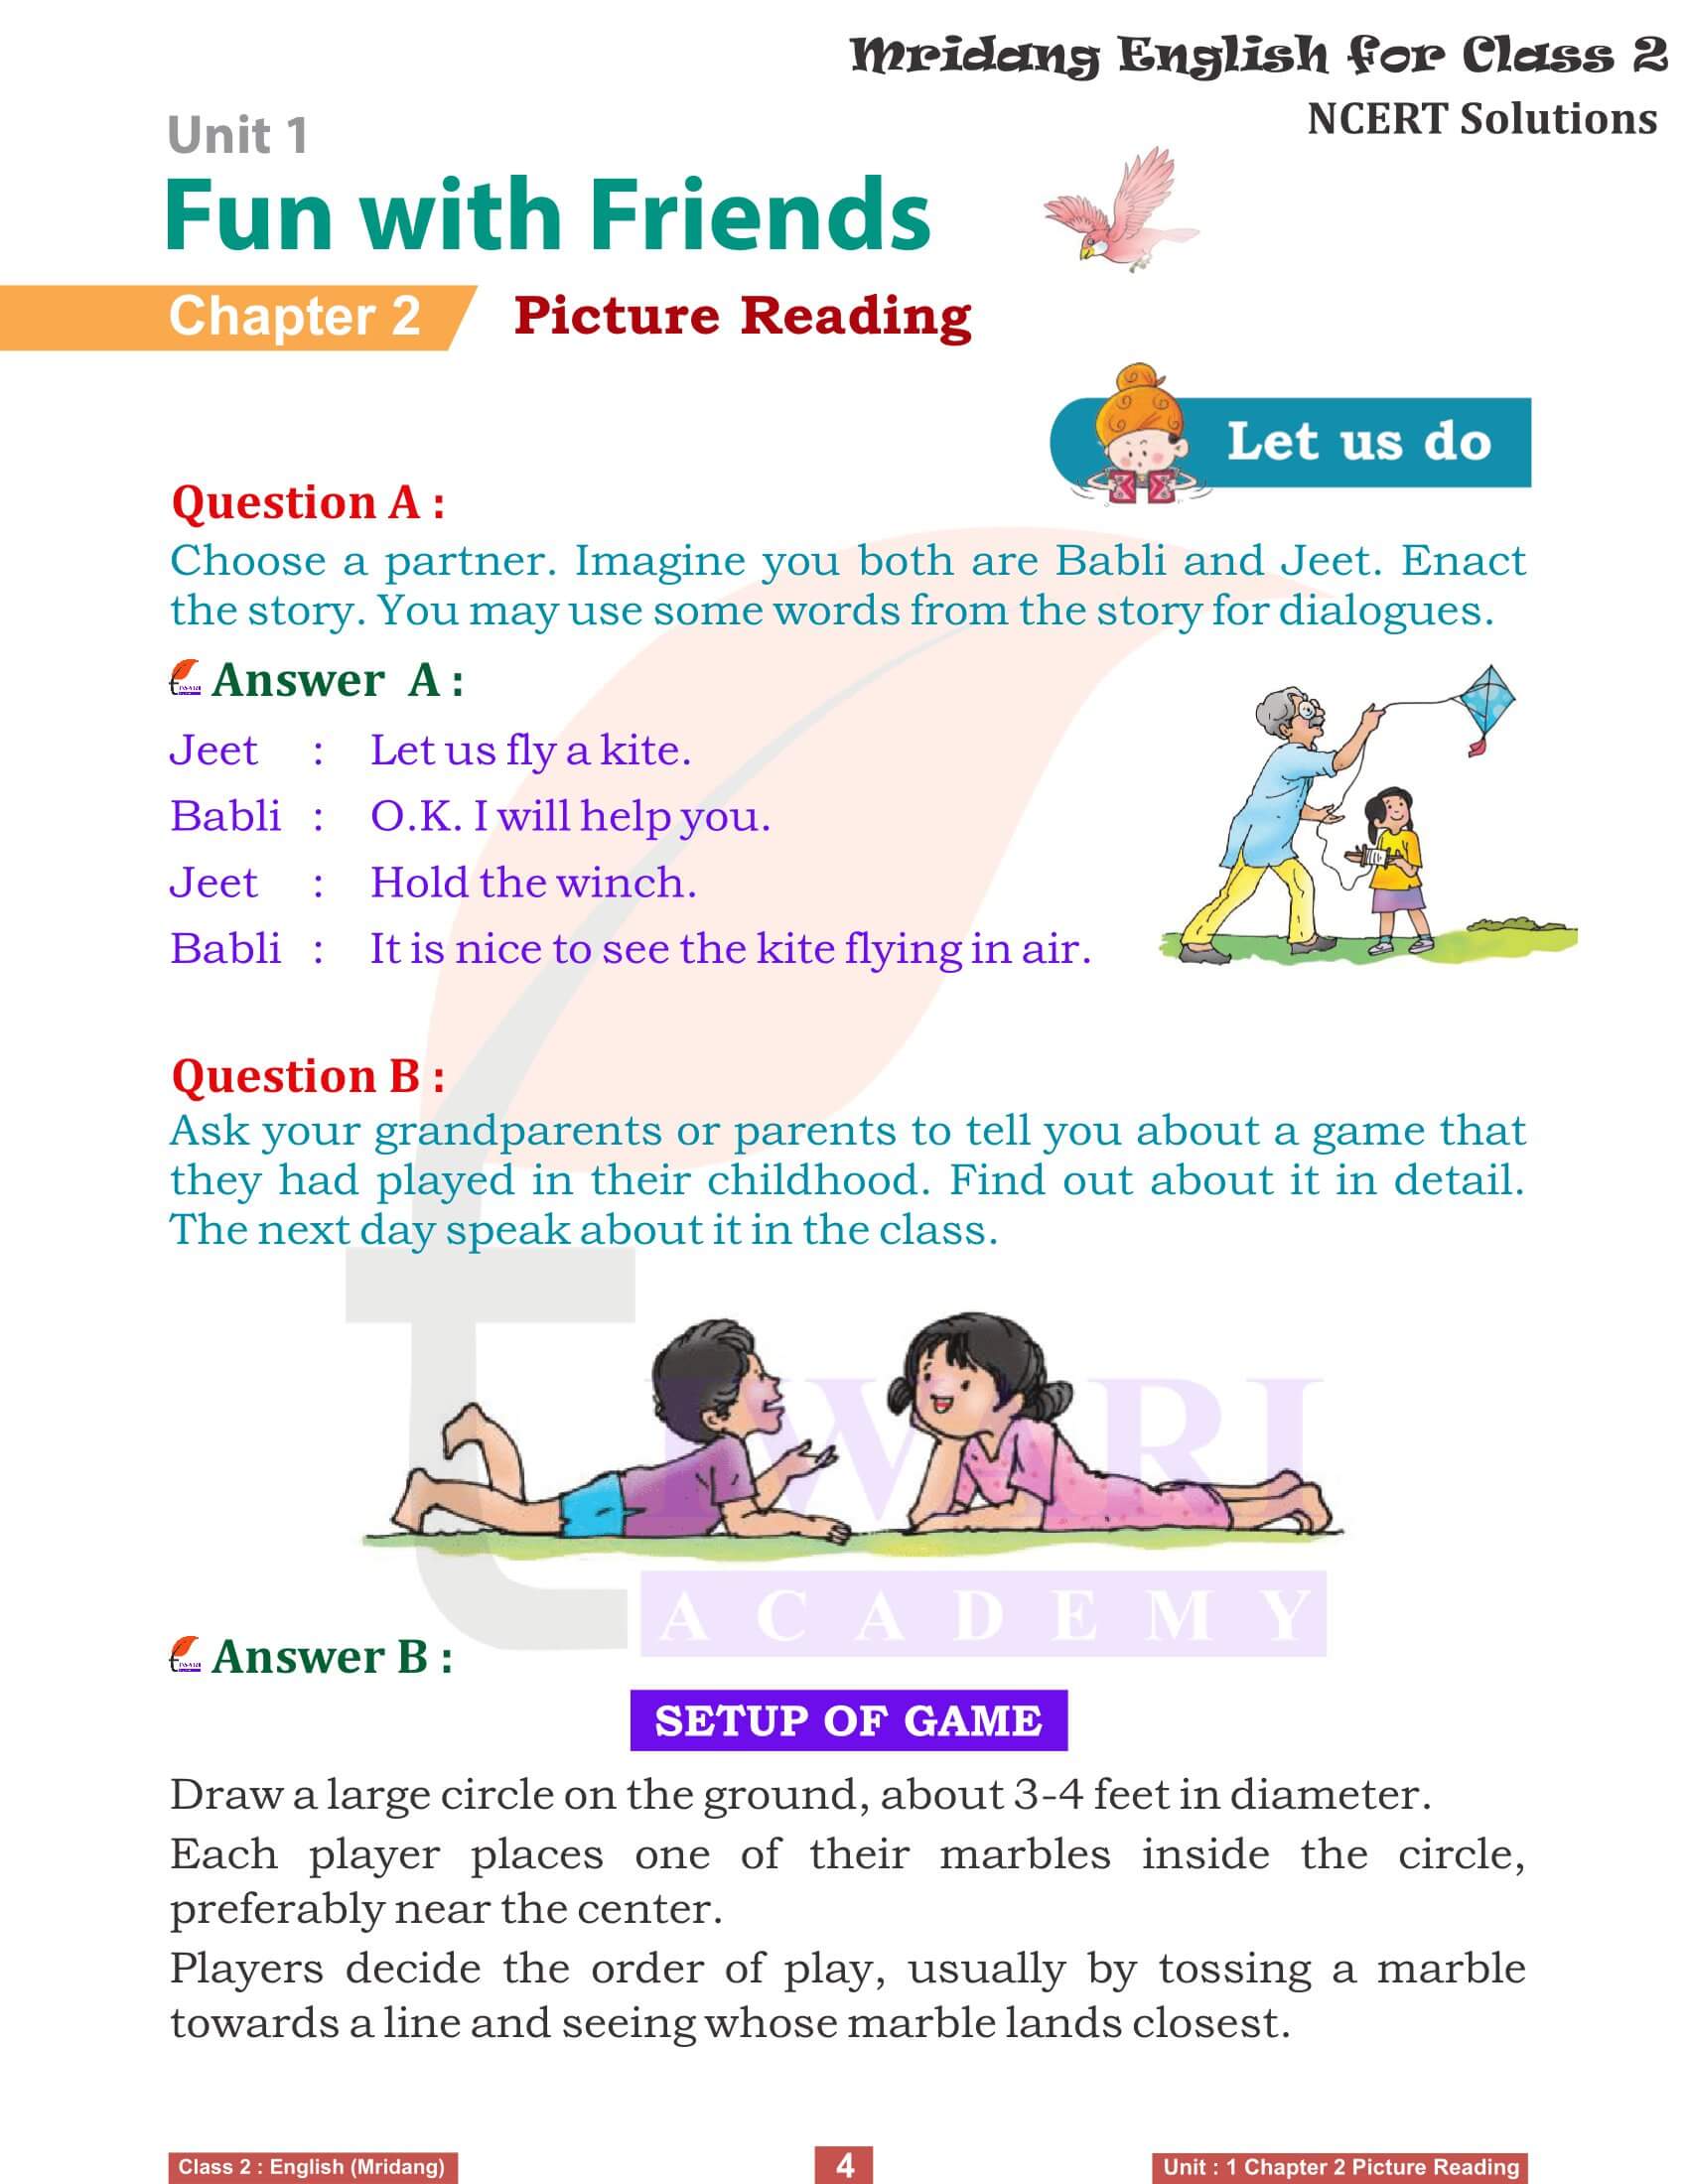 NCERT Solutions for Class 2 English Mridang Chapter 2 Picture Reading